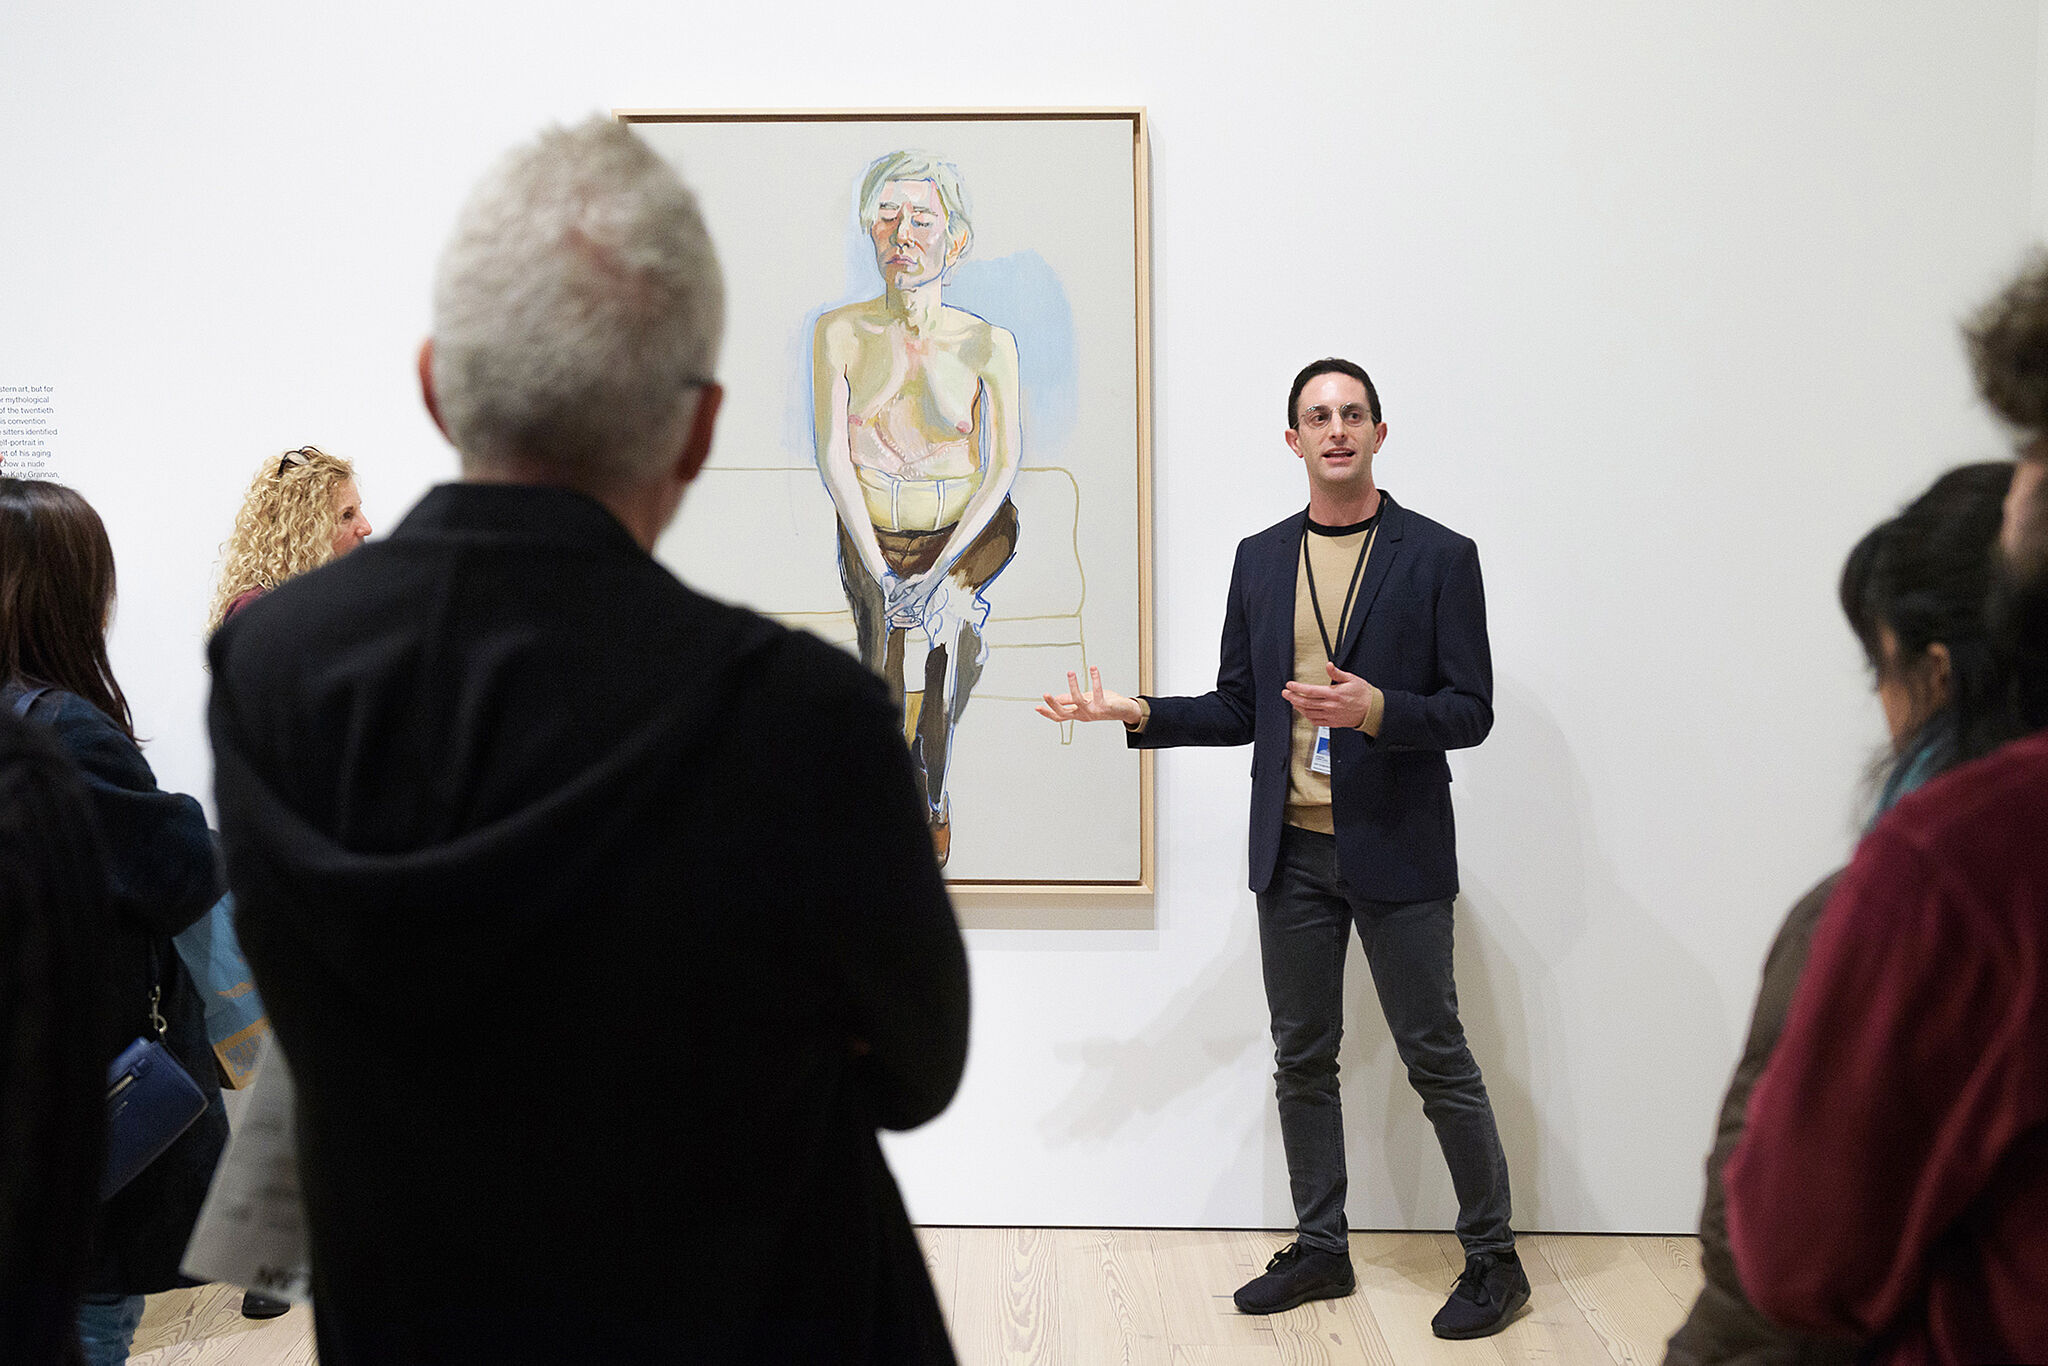 An educator stands in front of a work by Alice Neel, while students stand in the foreground.